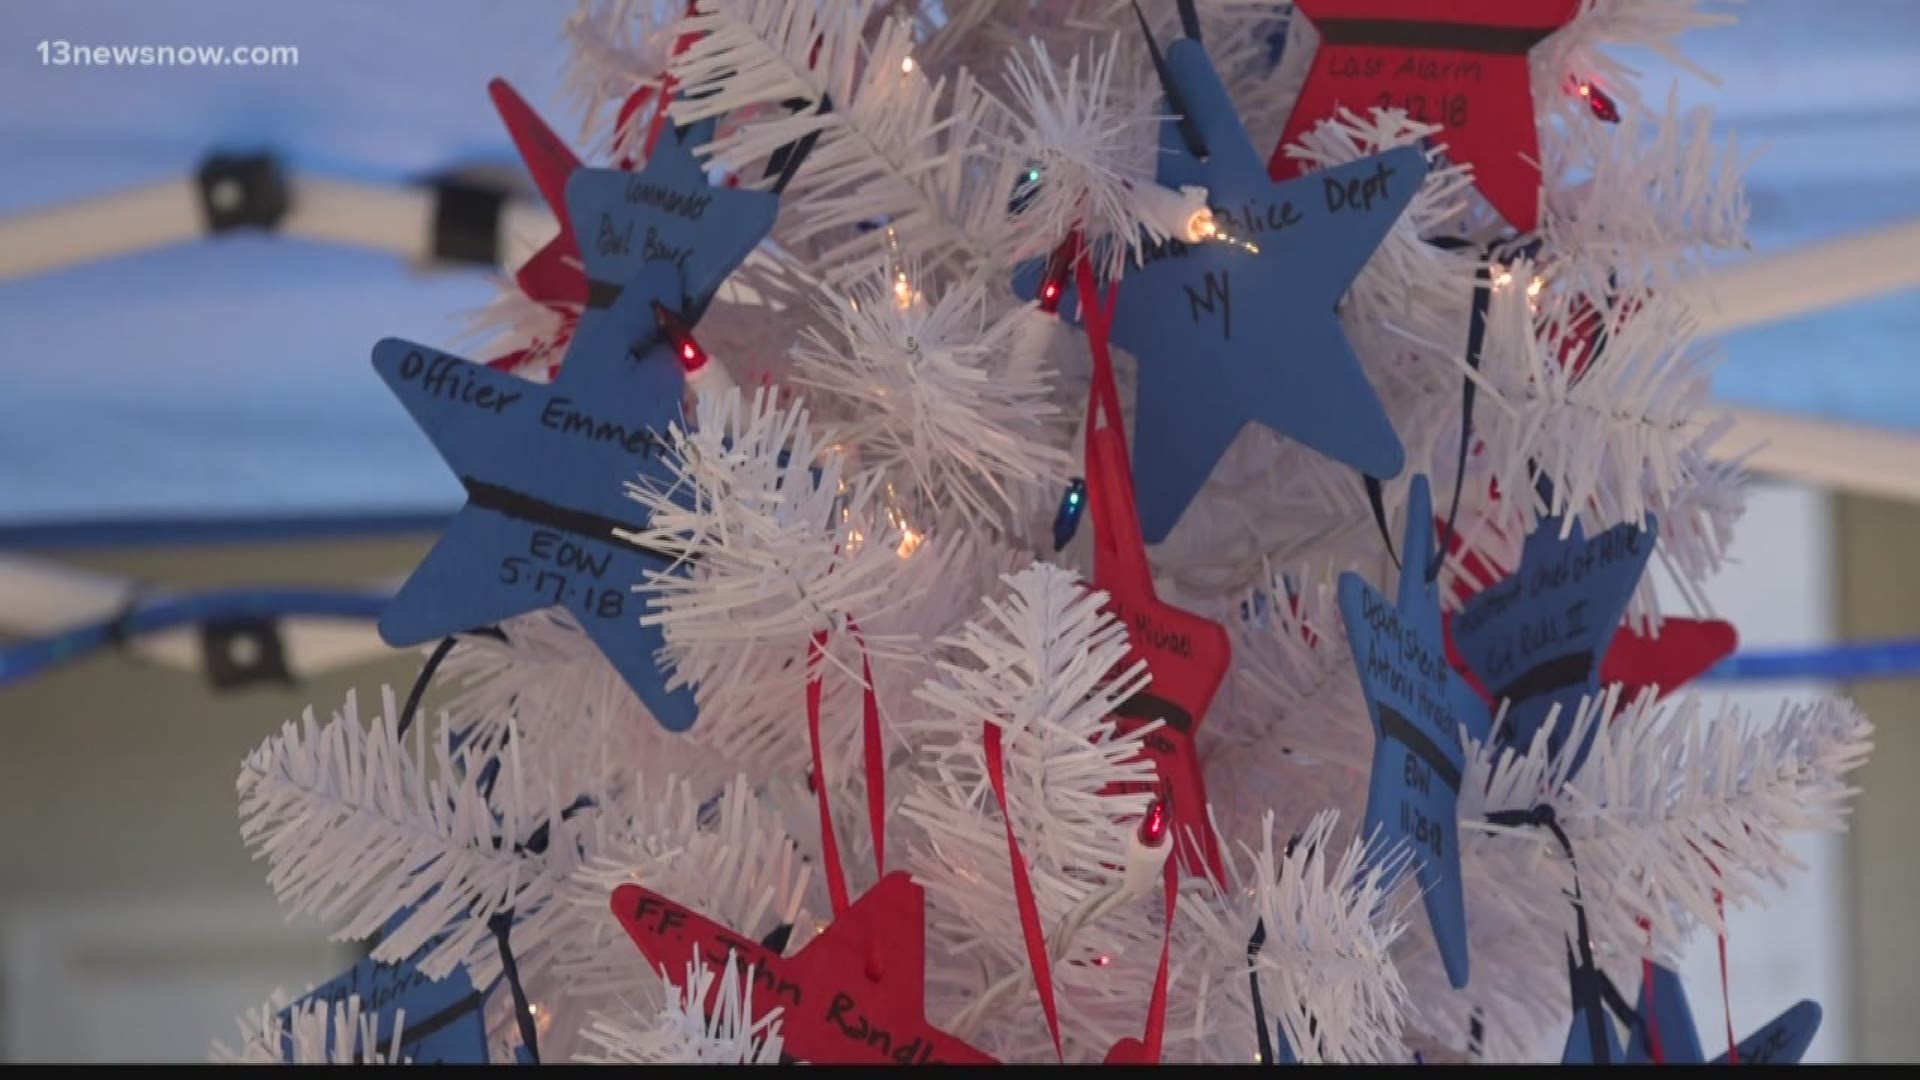 Bill Price placed a Christmas tree outside of his house in Suffolk. On the branches, he placed the names of all of the First Responders we lost in 2018.